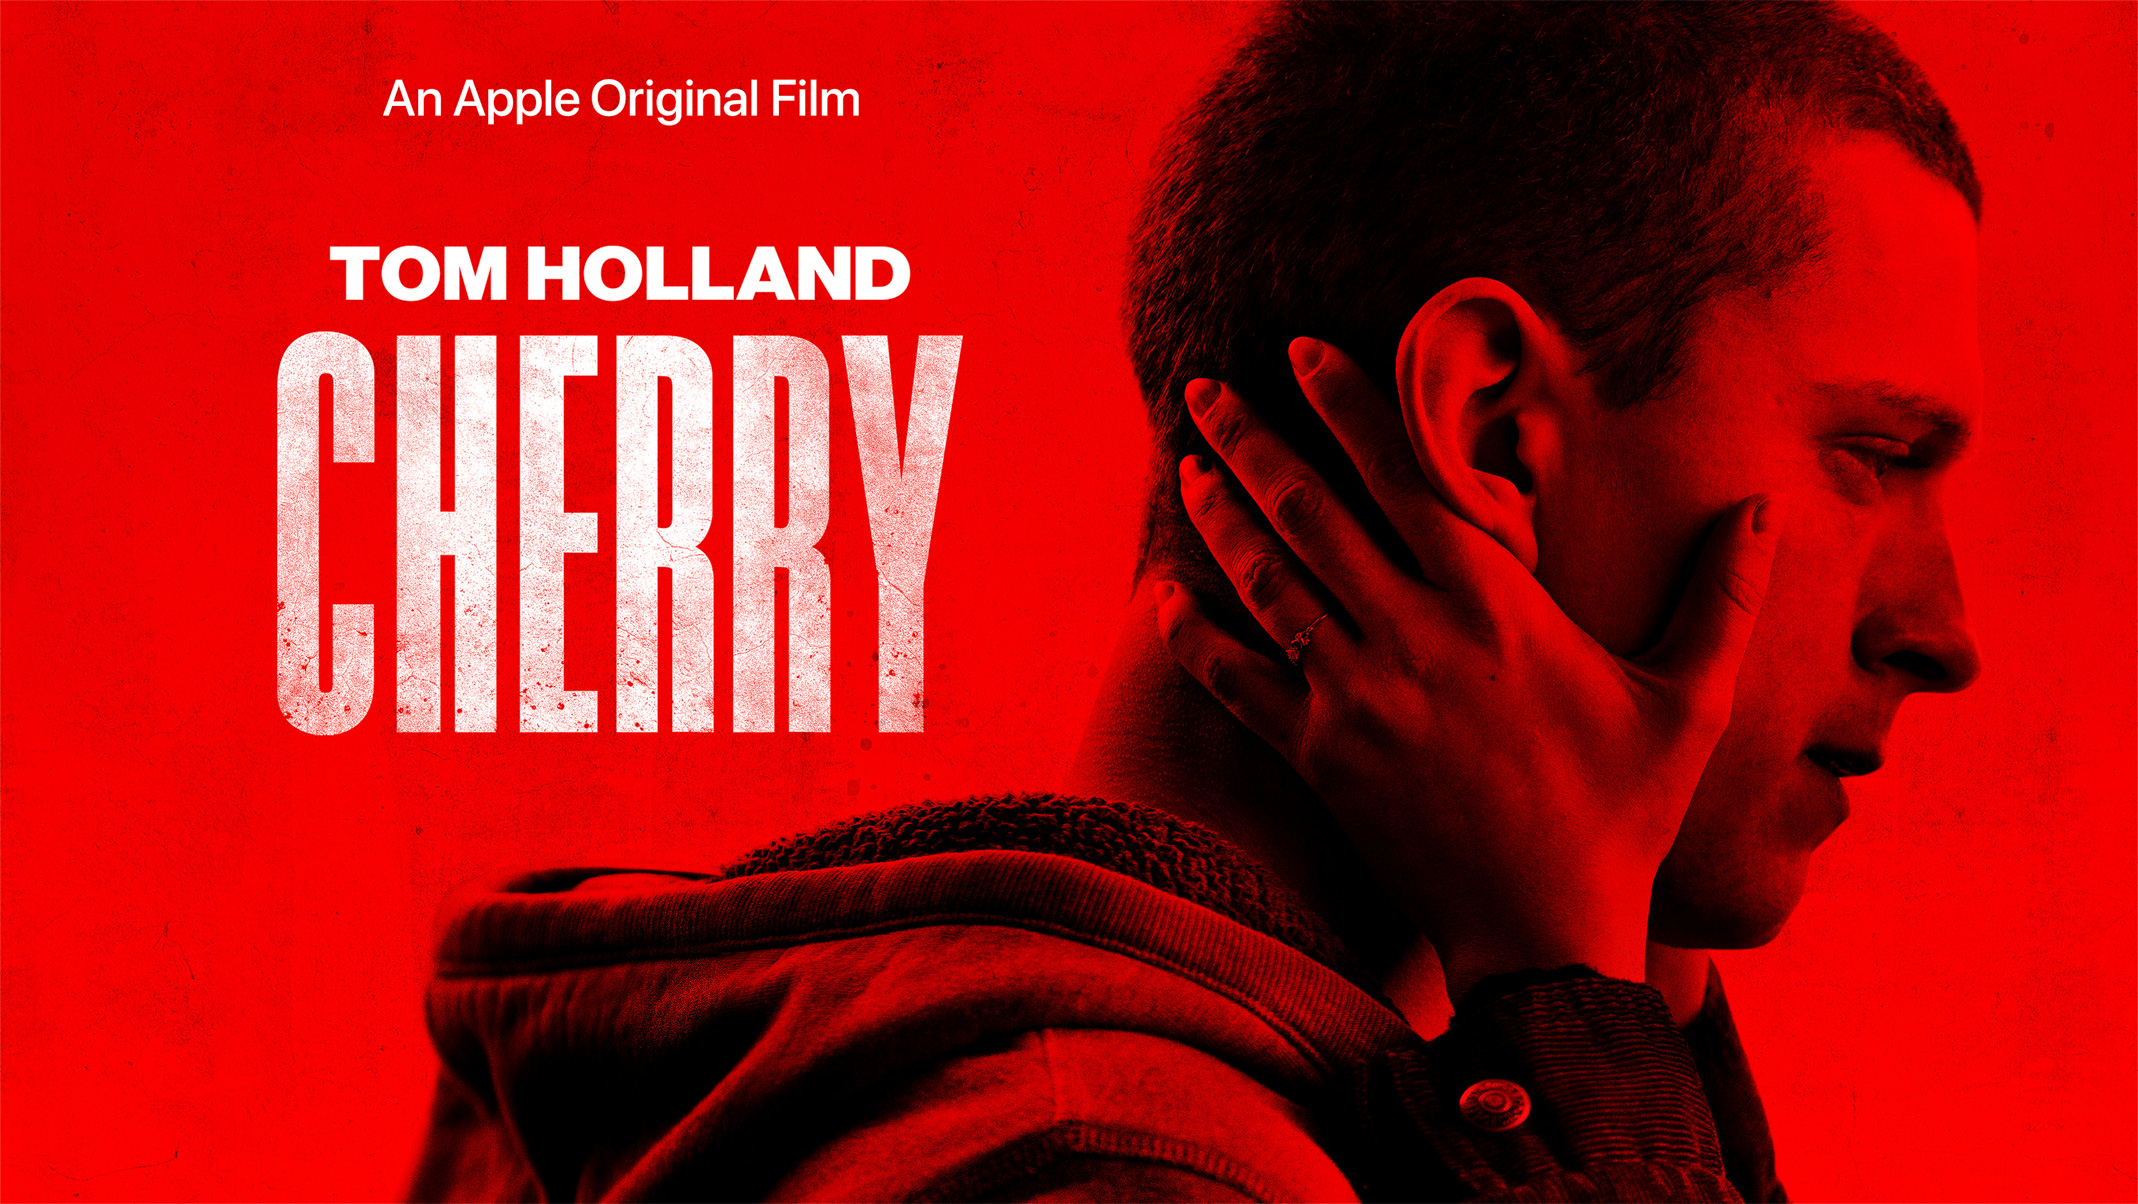 ‘Cherry’ Is Inspired by a True Story, But It Doesn’t Have to Be -Review